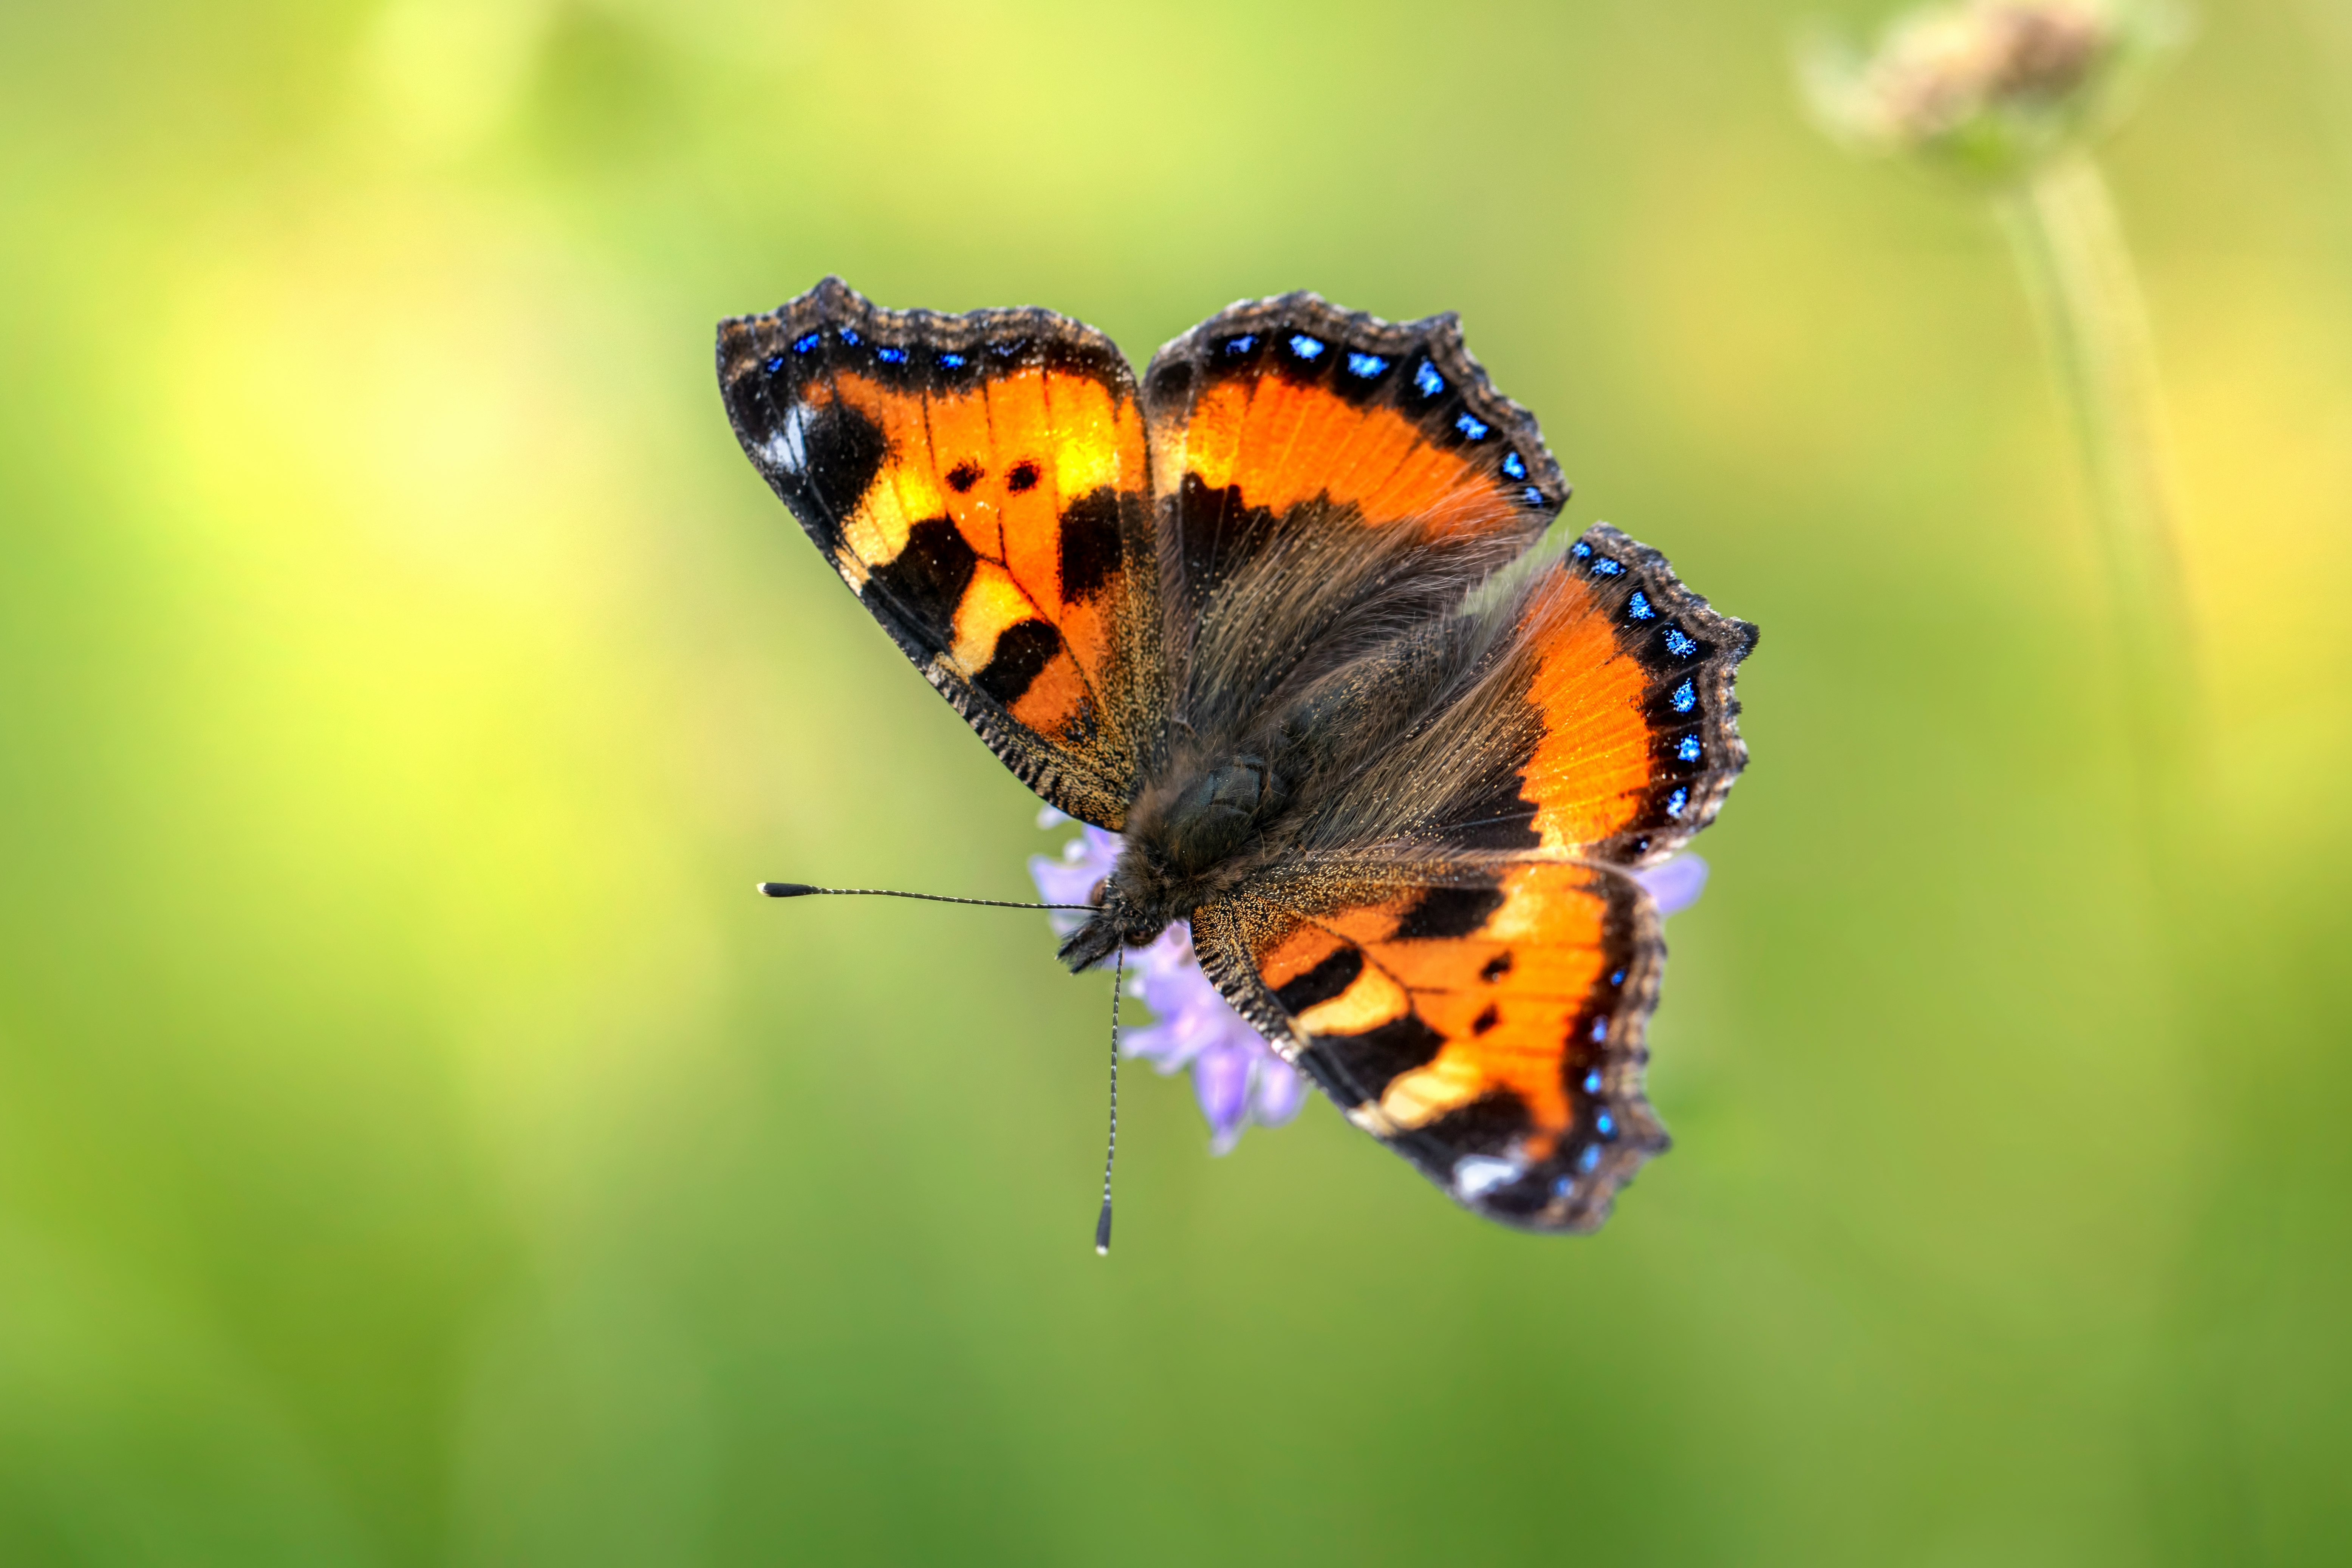 orange black and white butterfly perched on green leaf in close up photography during daytime